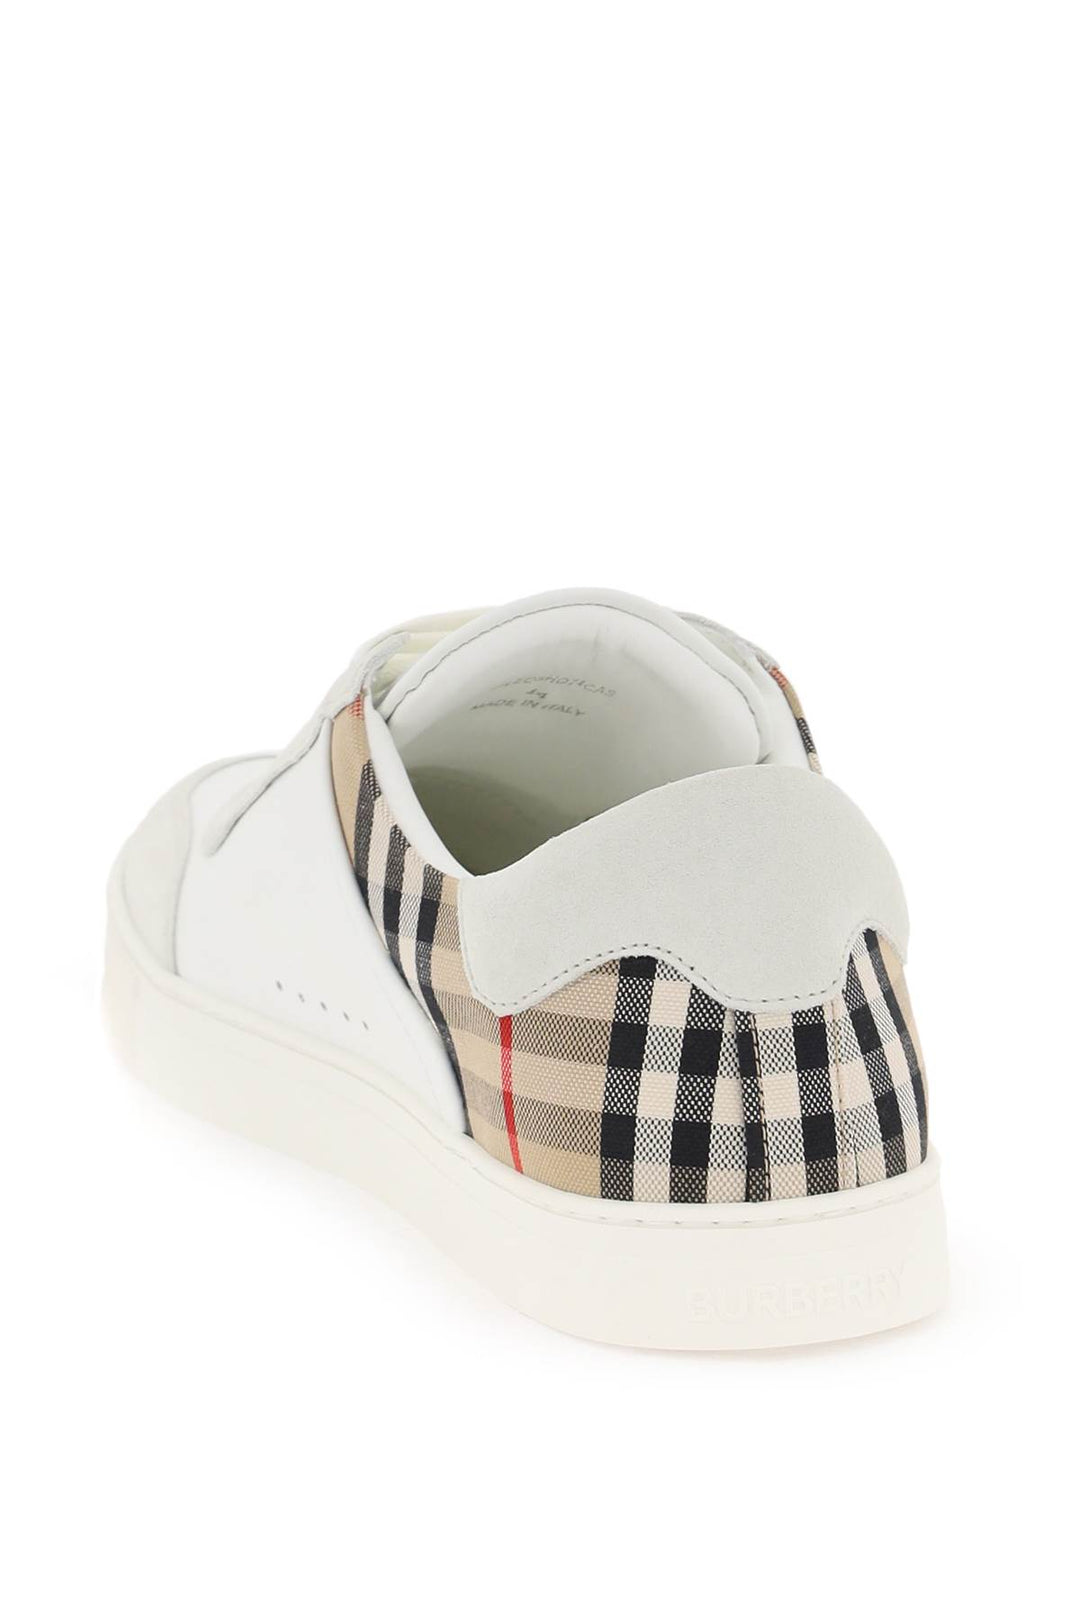 Burberry Check Leather Sneakers   Bianco